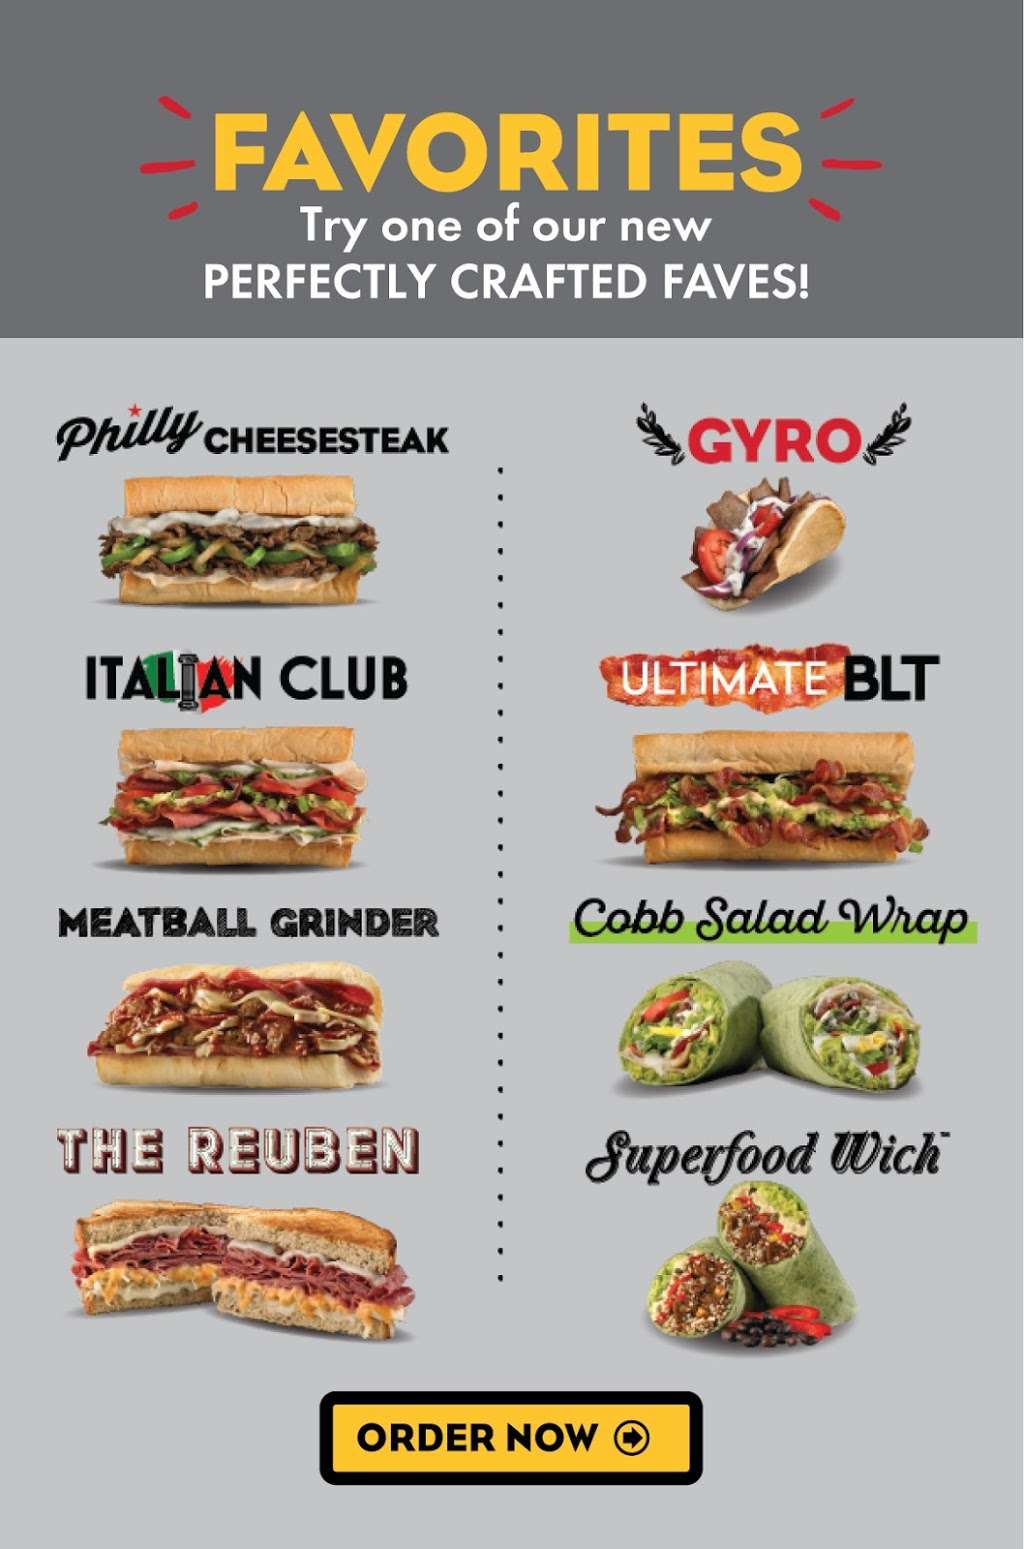 Which Wich Superior Sandwiches | 13910 Olivia Way #102, Fishers, IN 46037 | Phone: (317) 776-4085